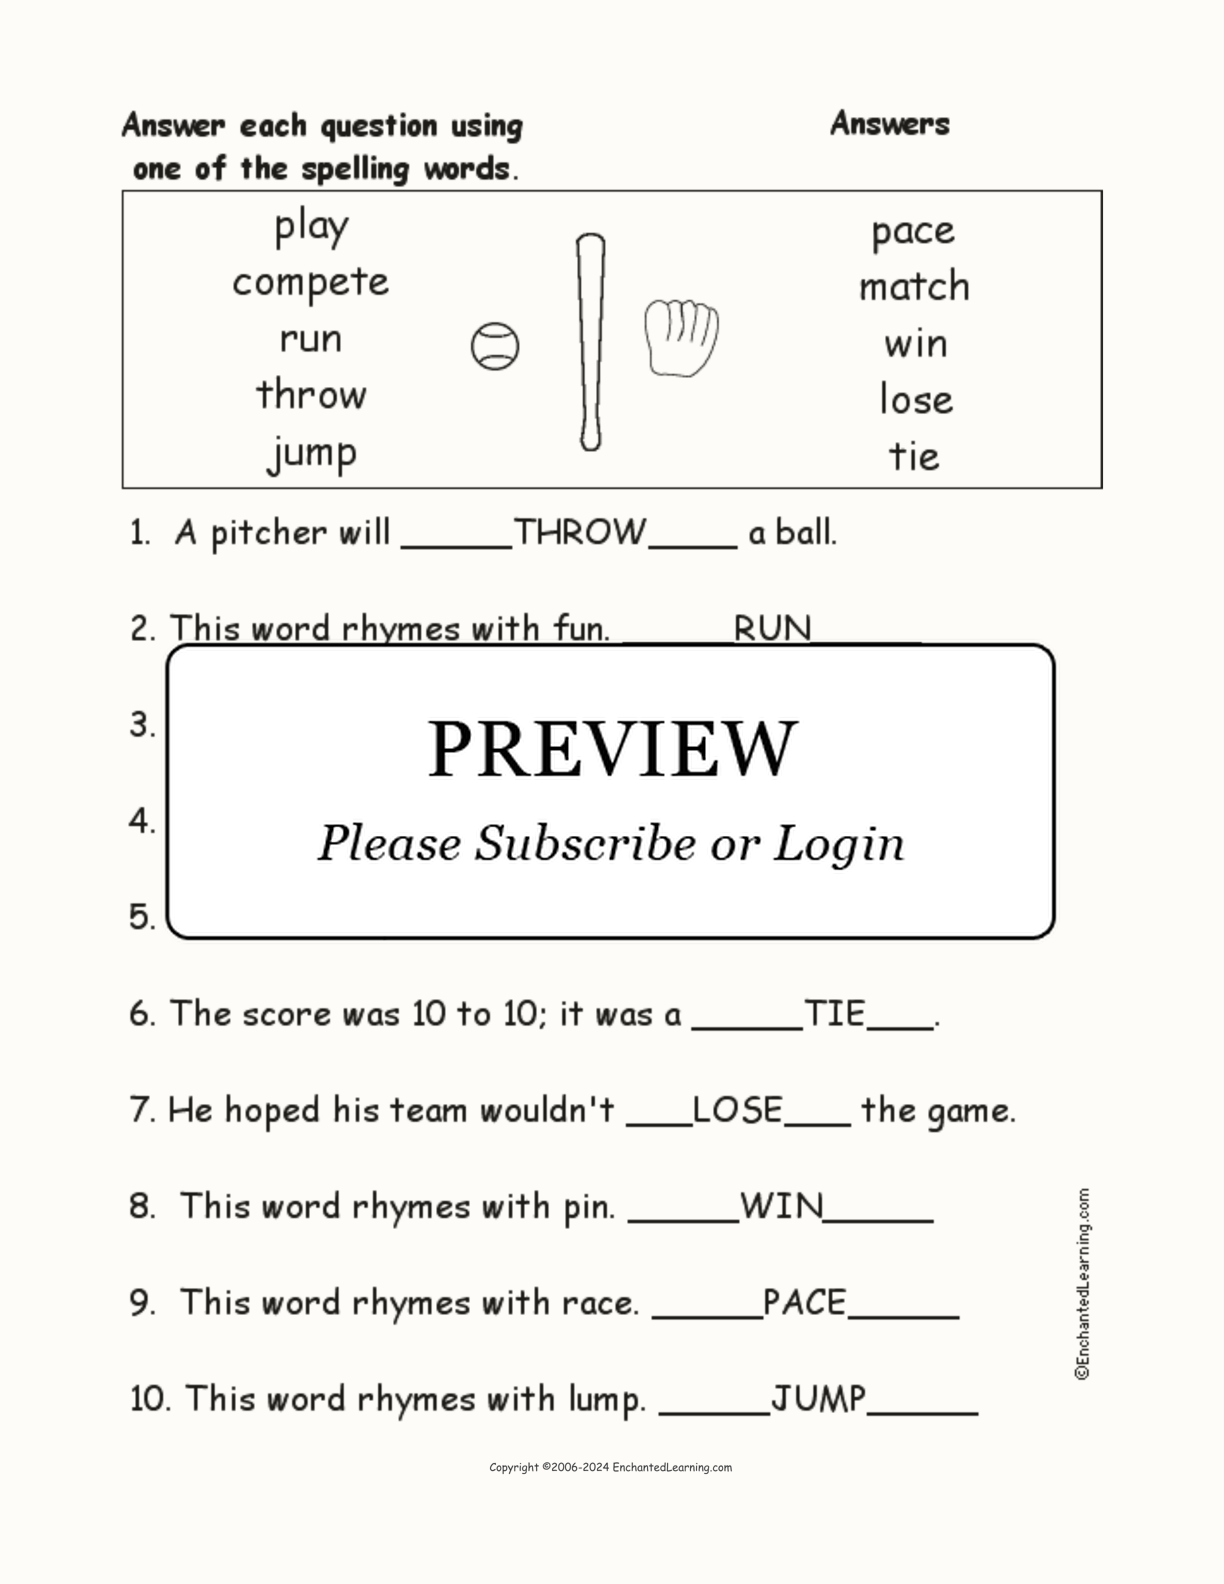 Sports Spelling Word Questions interactive worksheet page 2